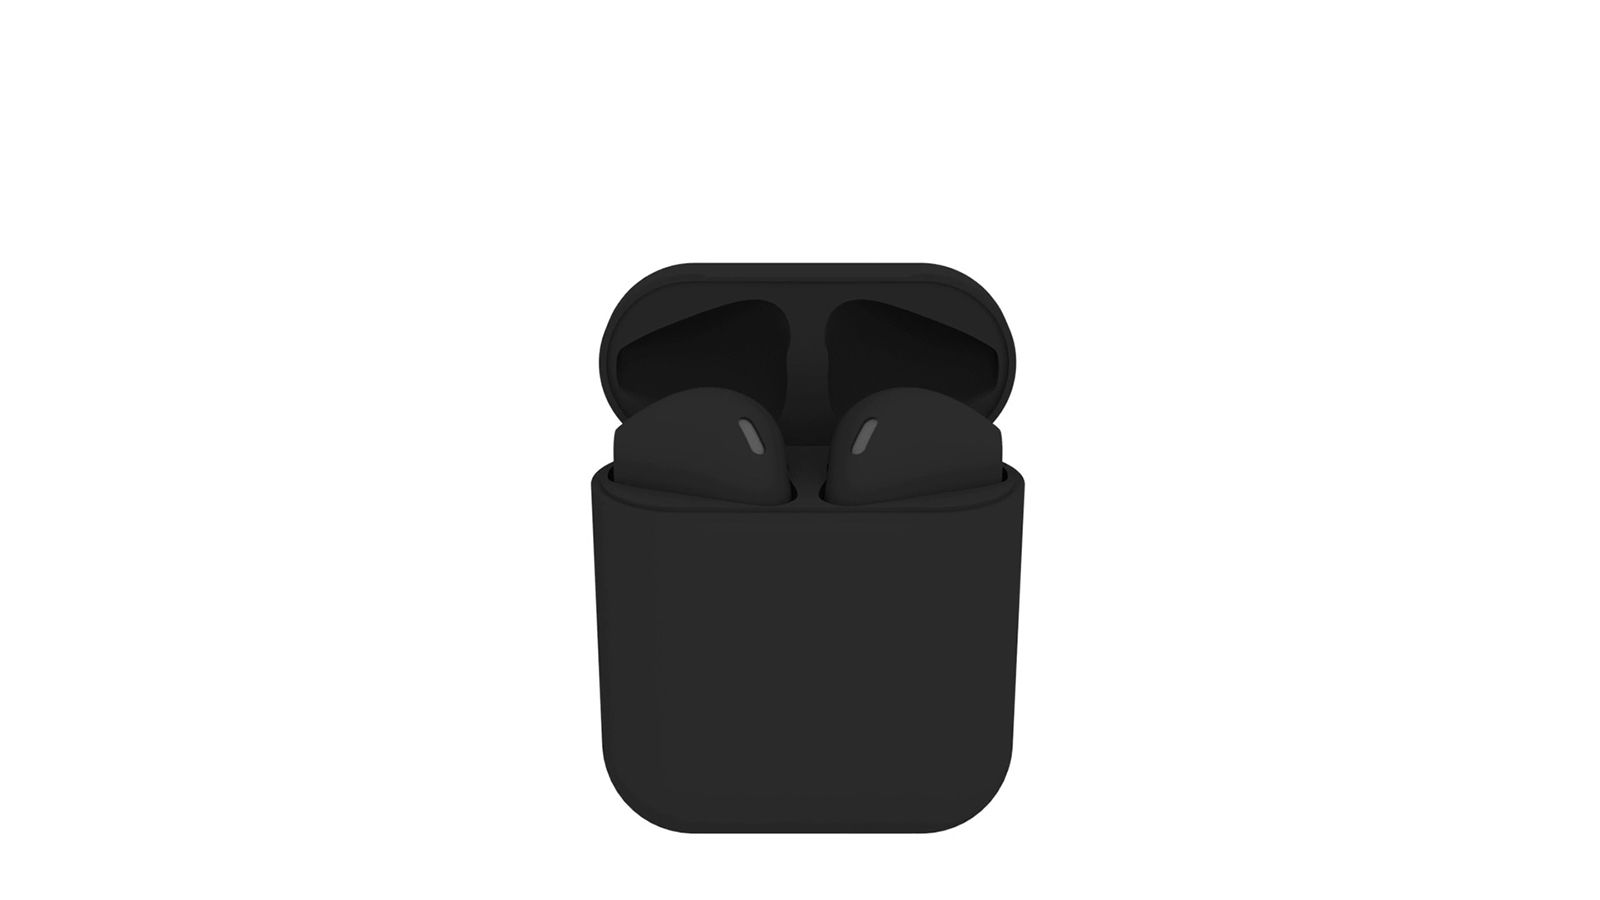 Black AirPods Exist Thanks To BlackPods Mac Observer